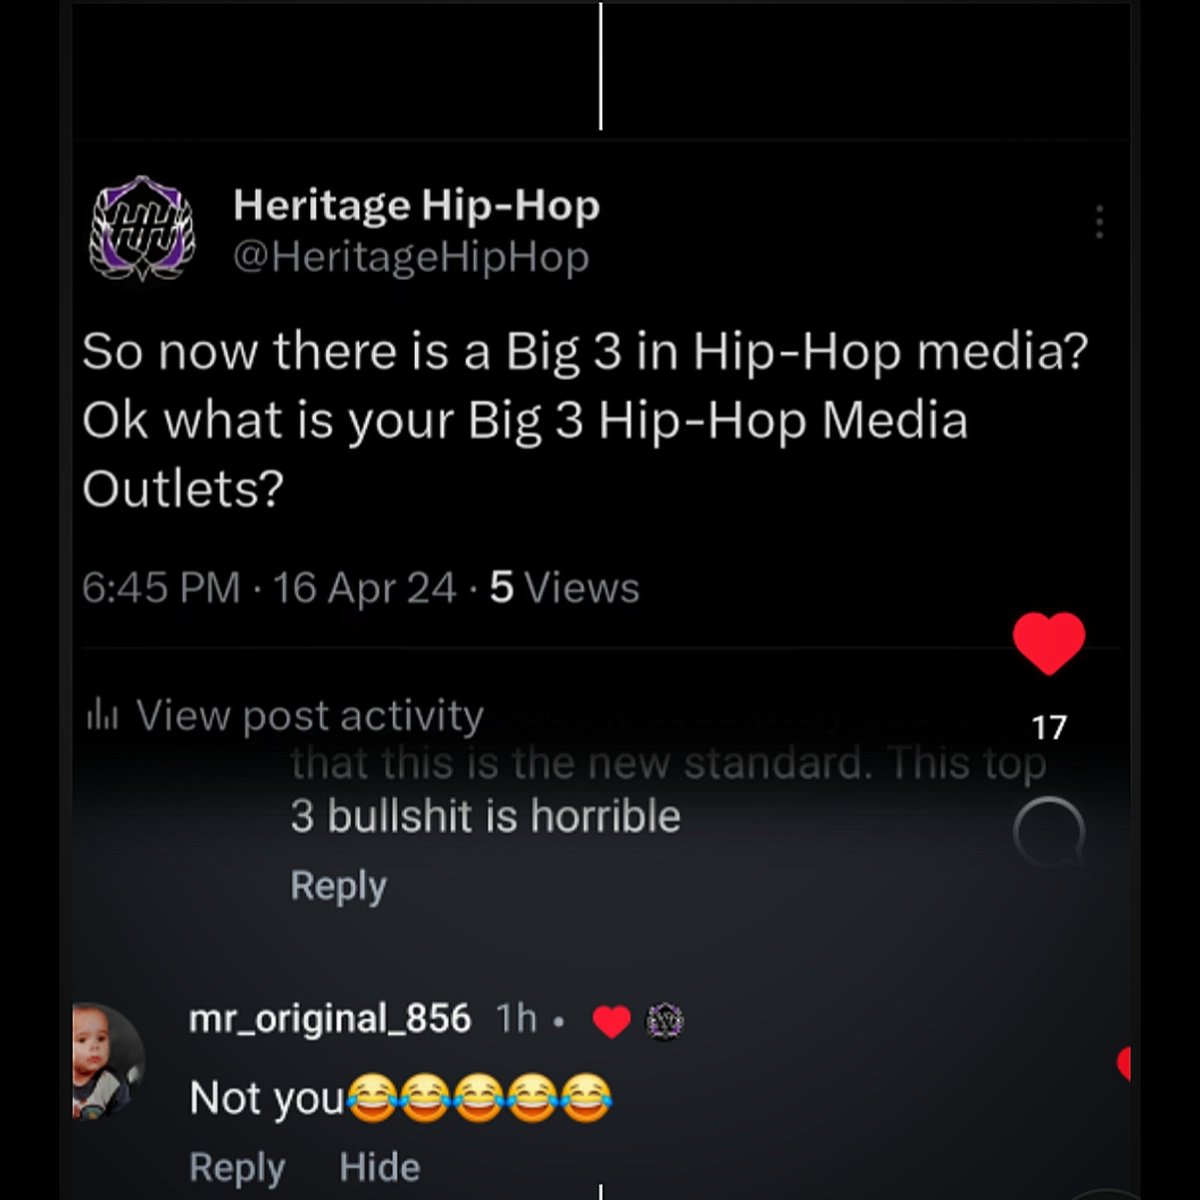 This is light but @DoggieDiamonds told me when you doing your thing people will hate on you. I don't post everything but this made me laugh. I guess I have made it so it will only get 'betrer'. HERITAGEHIPHOP.COM